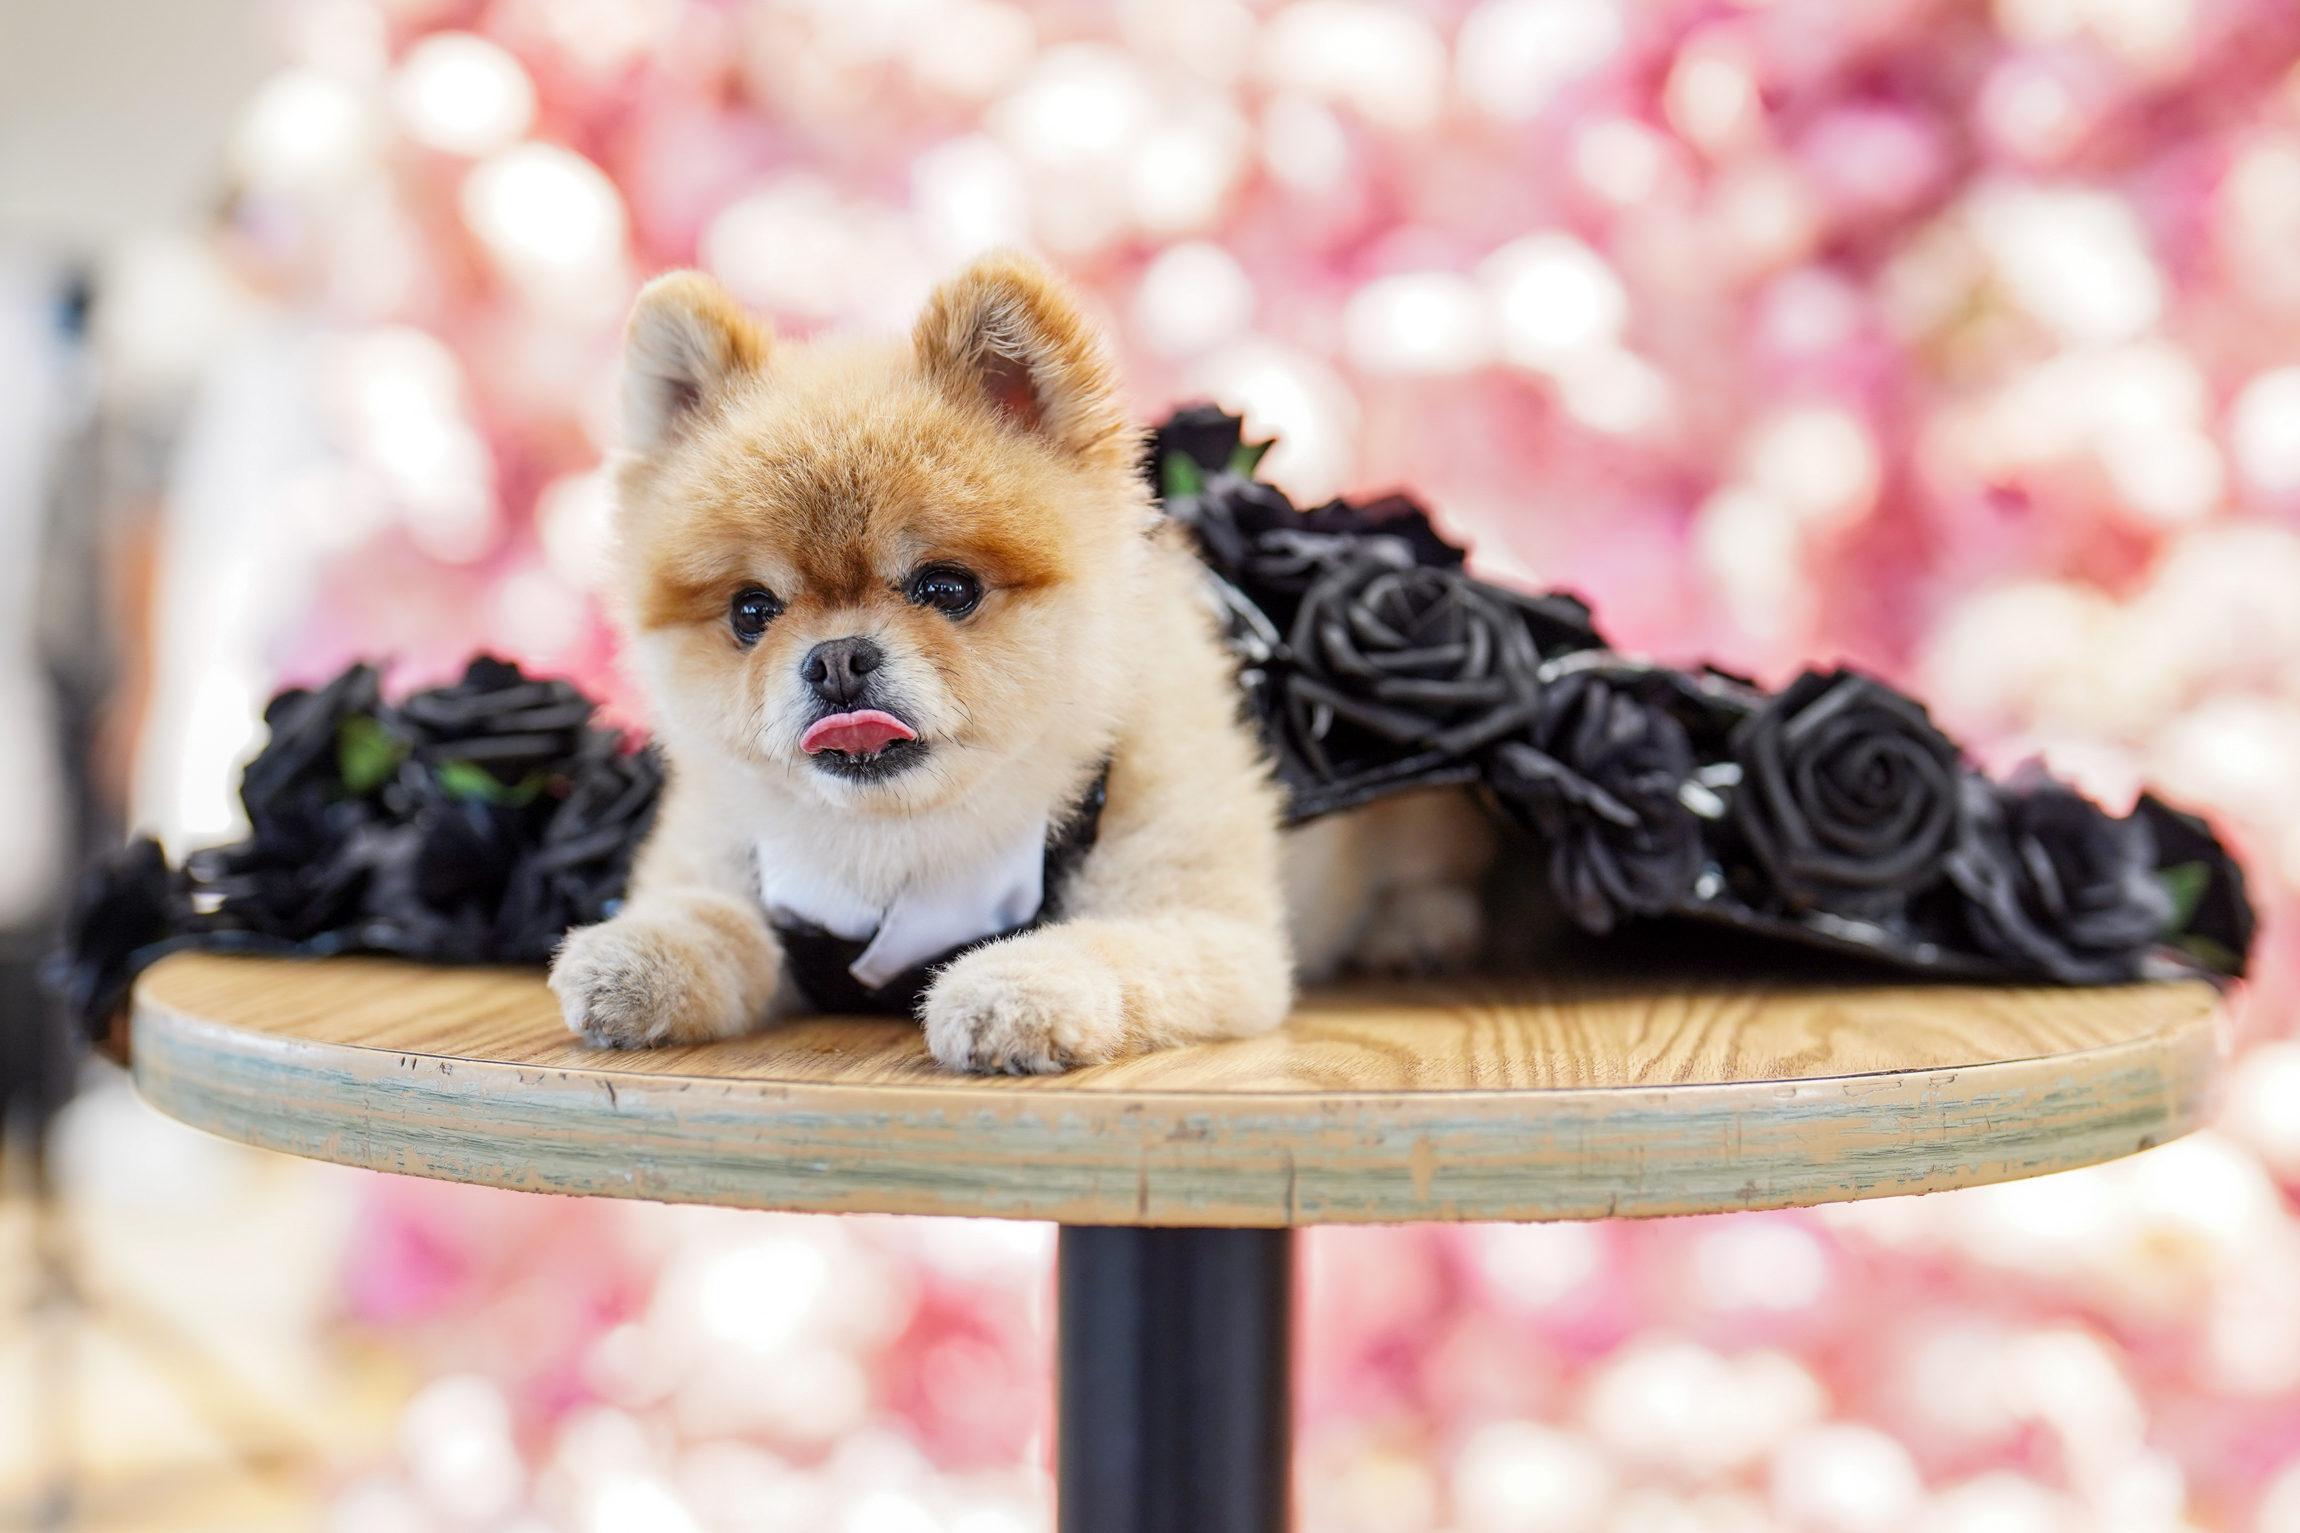 A dog at the Pet Gala in a black floral dress.